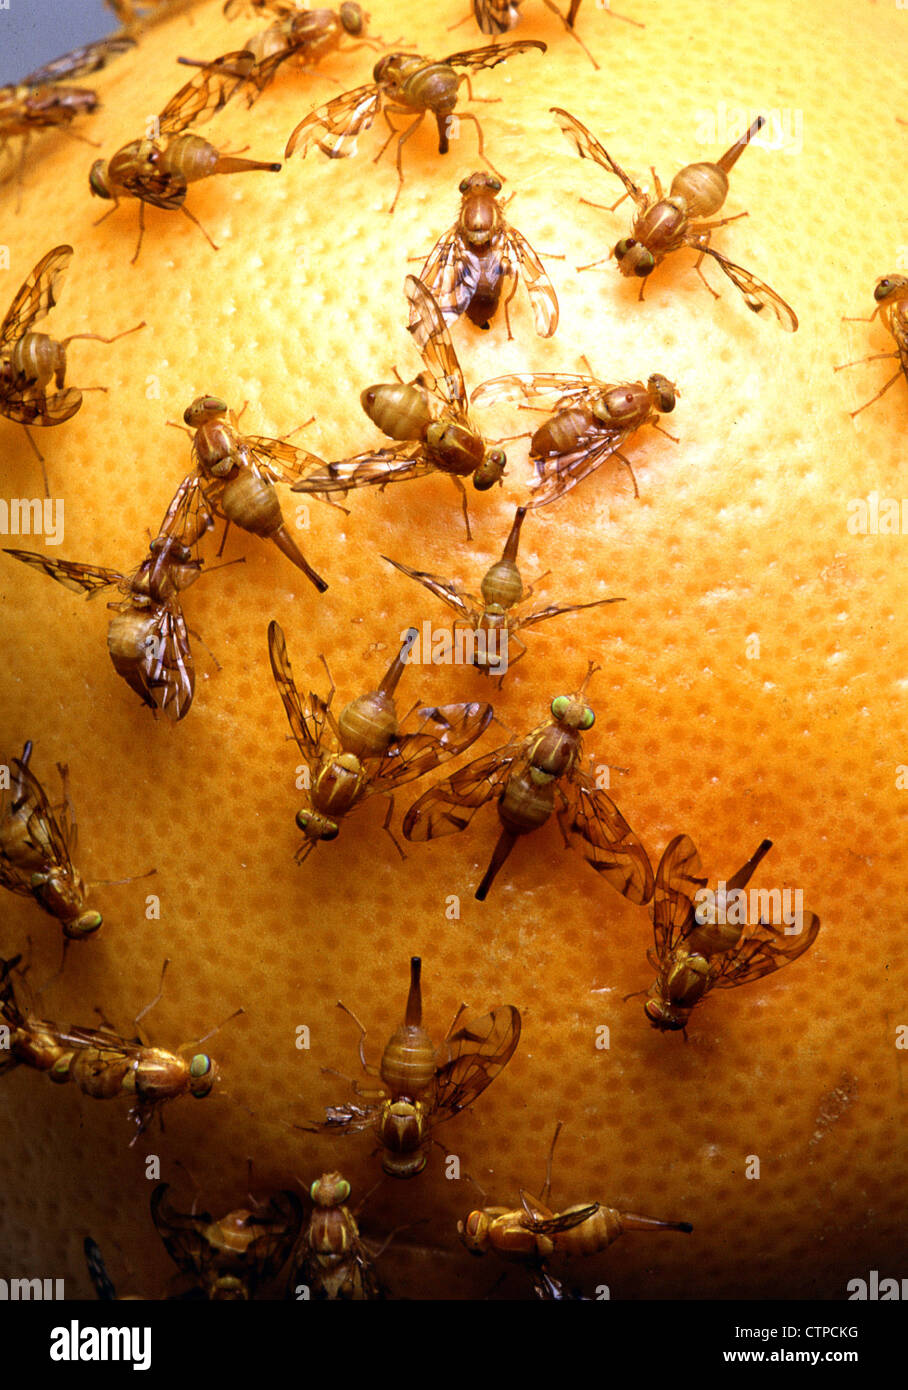 Female Mexican fruit flies photographed on an orange Stock Photo